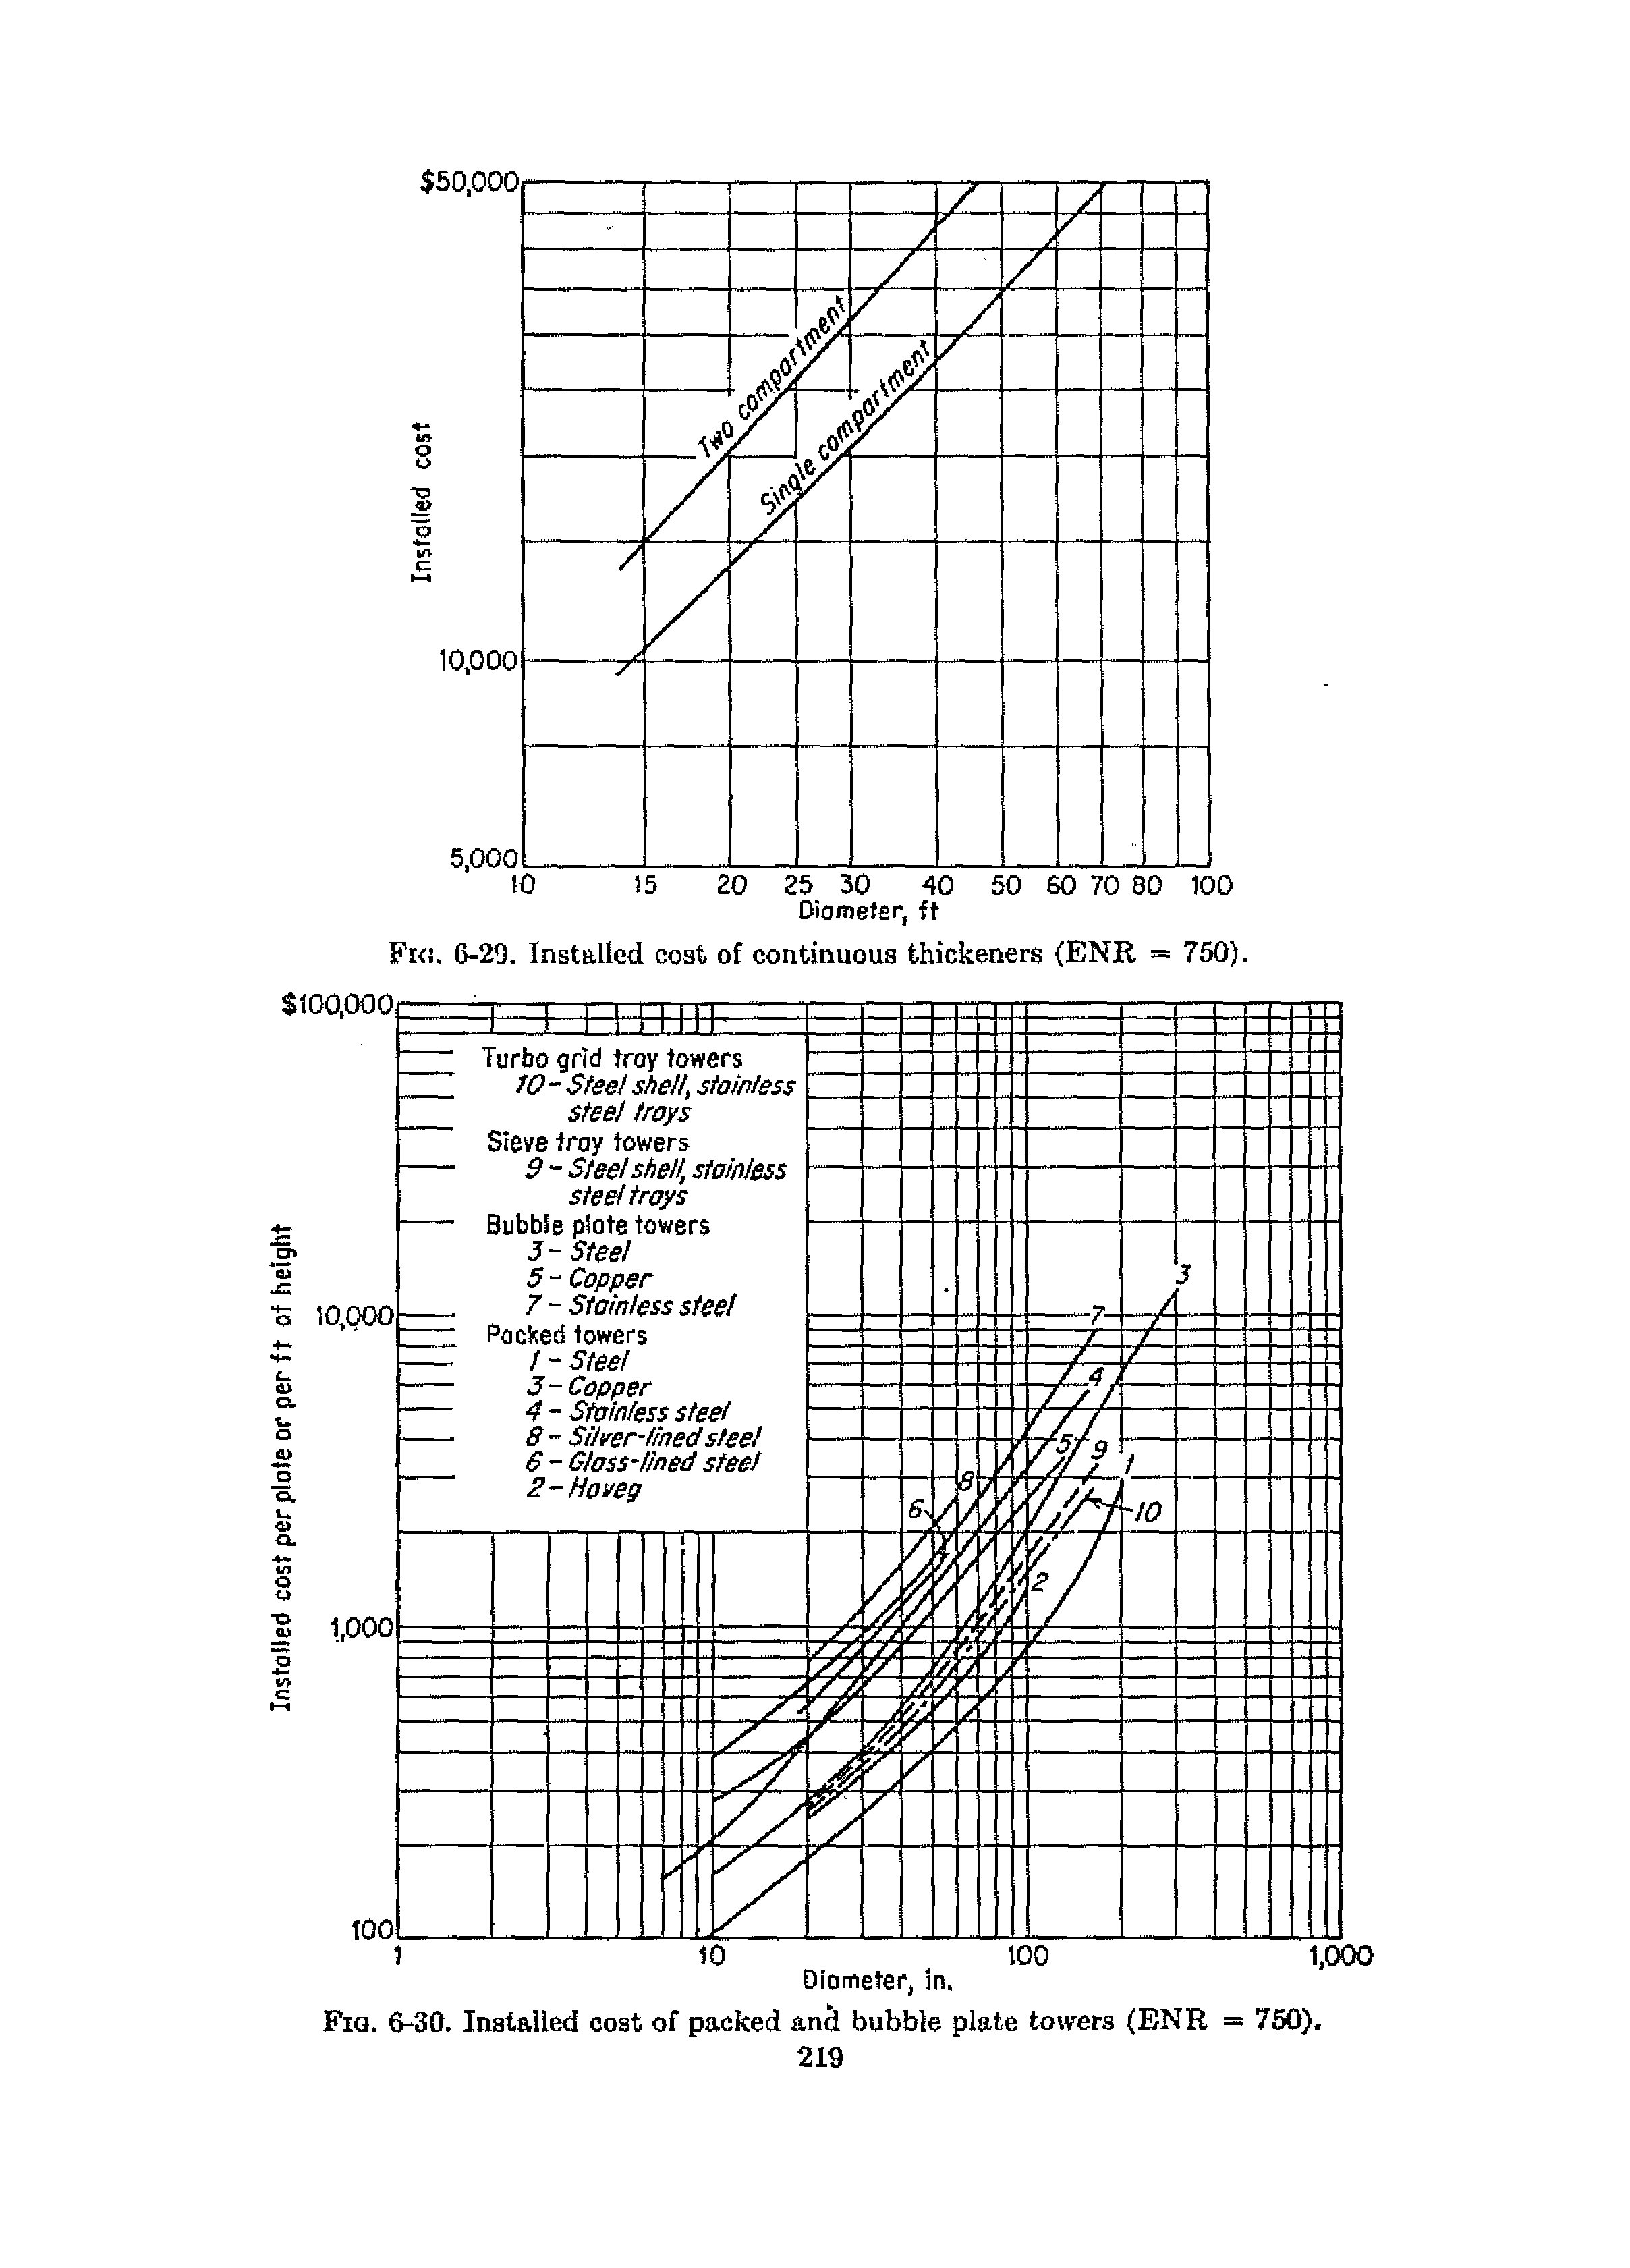 Fig. 6-30. Installed cost of packed ani bubble plate towers (ENR = 760).